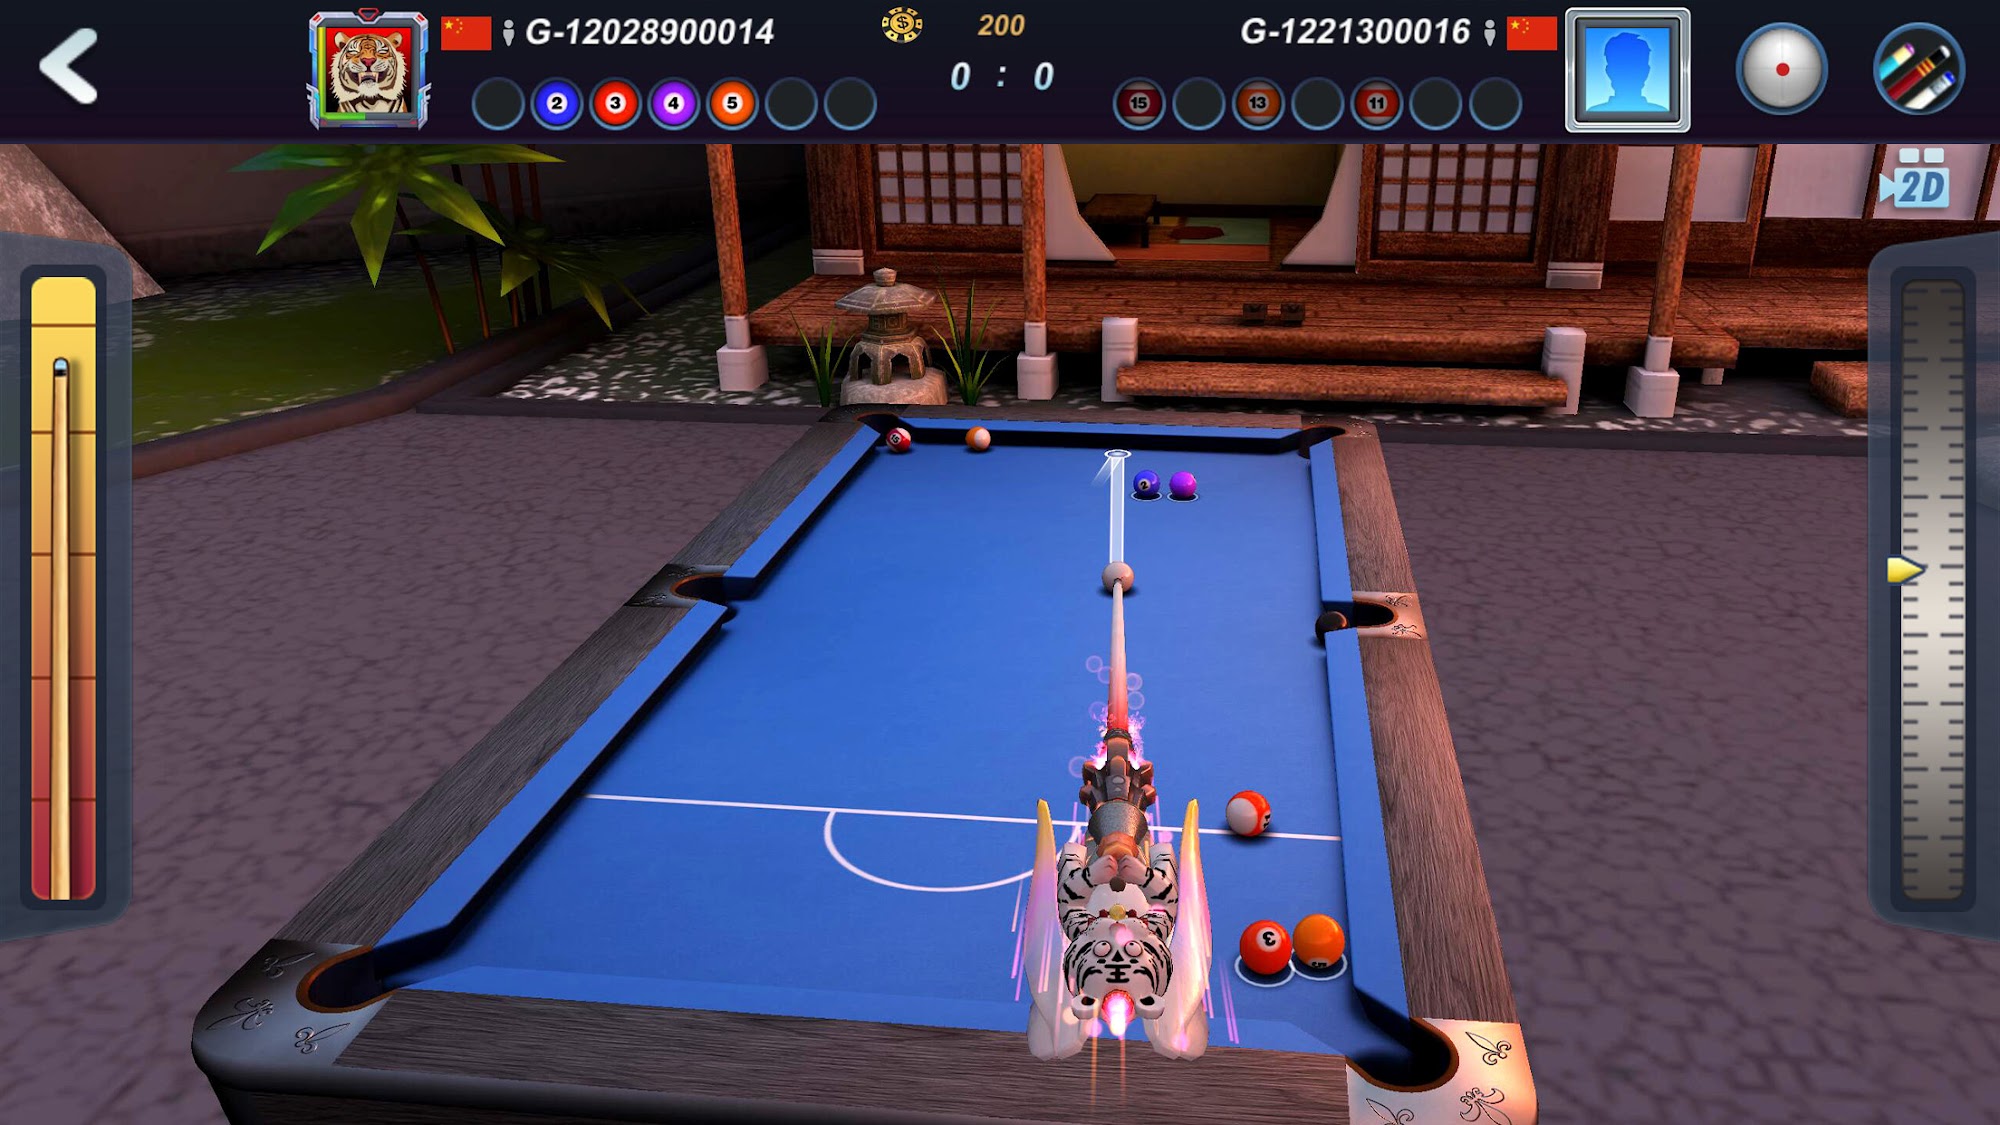 Real Pool 3D 2 - Android game screenshots.